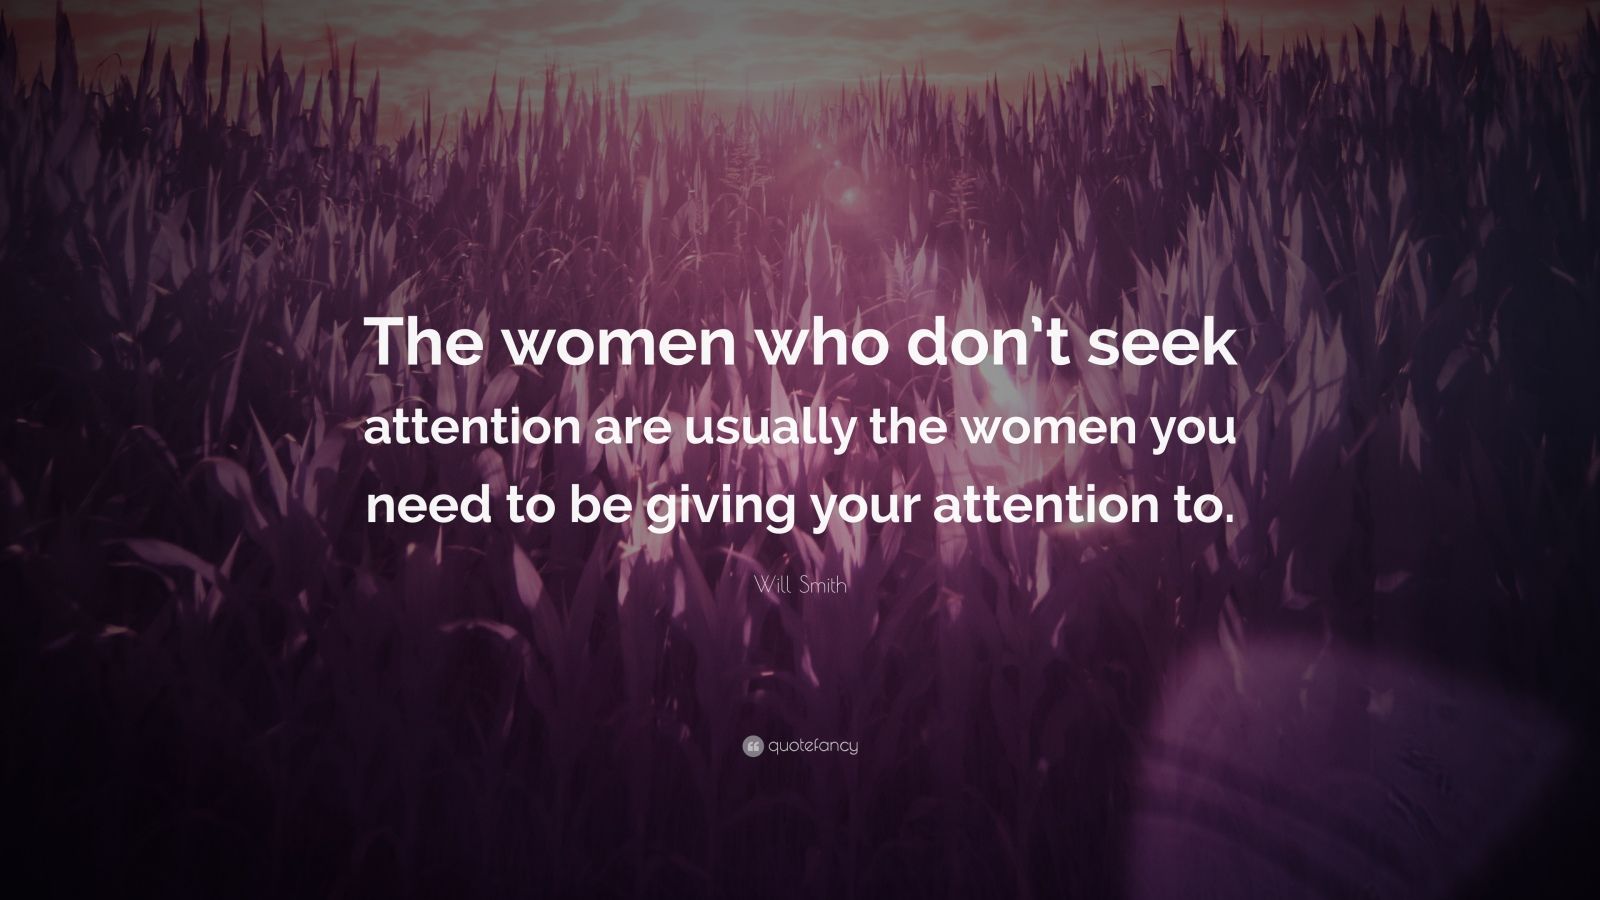 Will Smith Quote: “The women who don’t seek attention are usually the